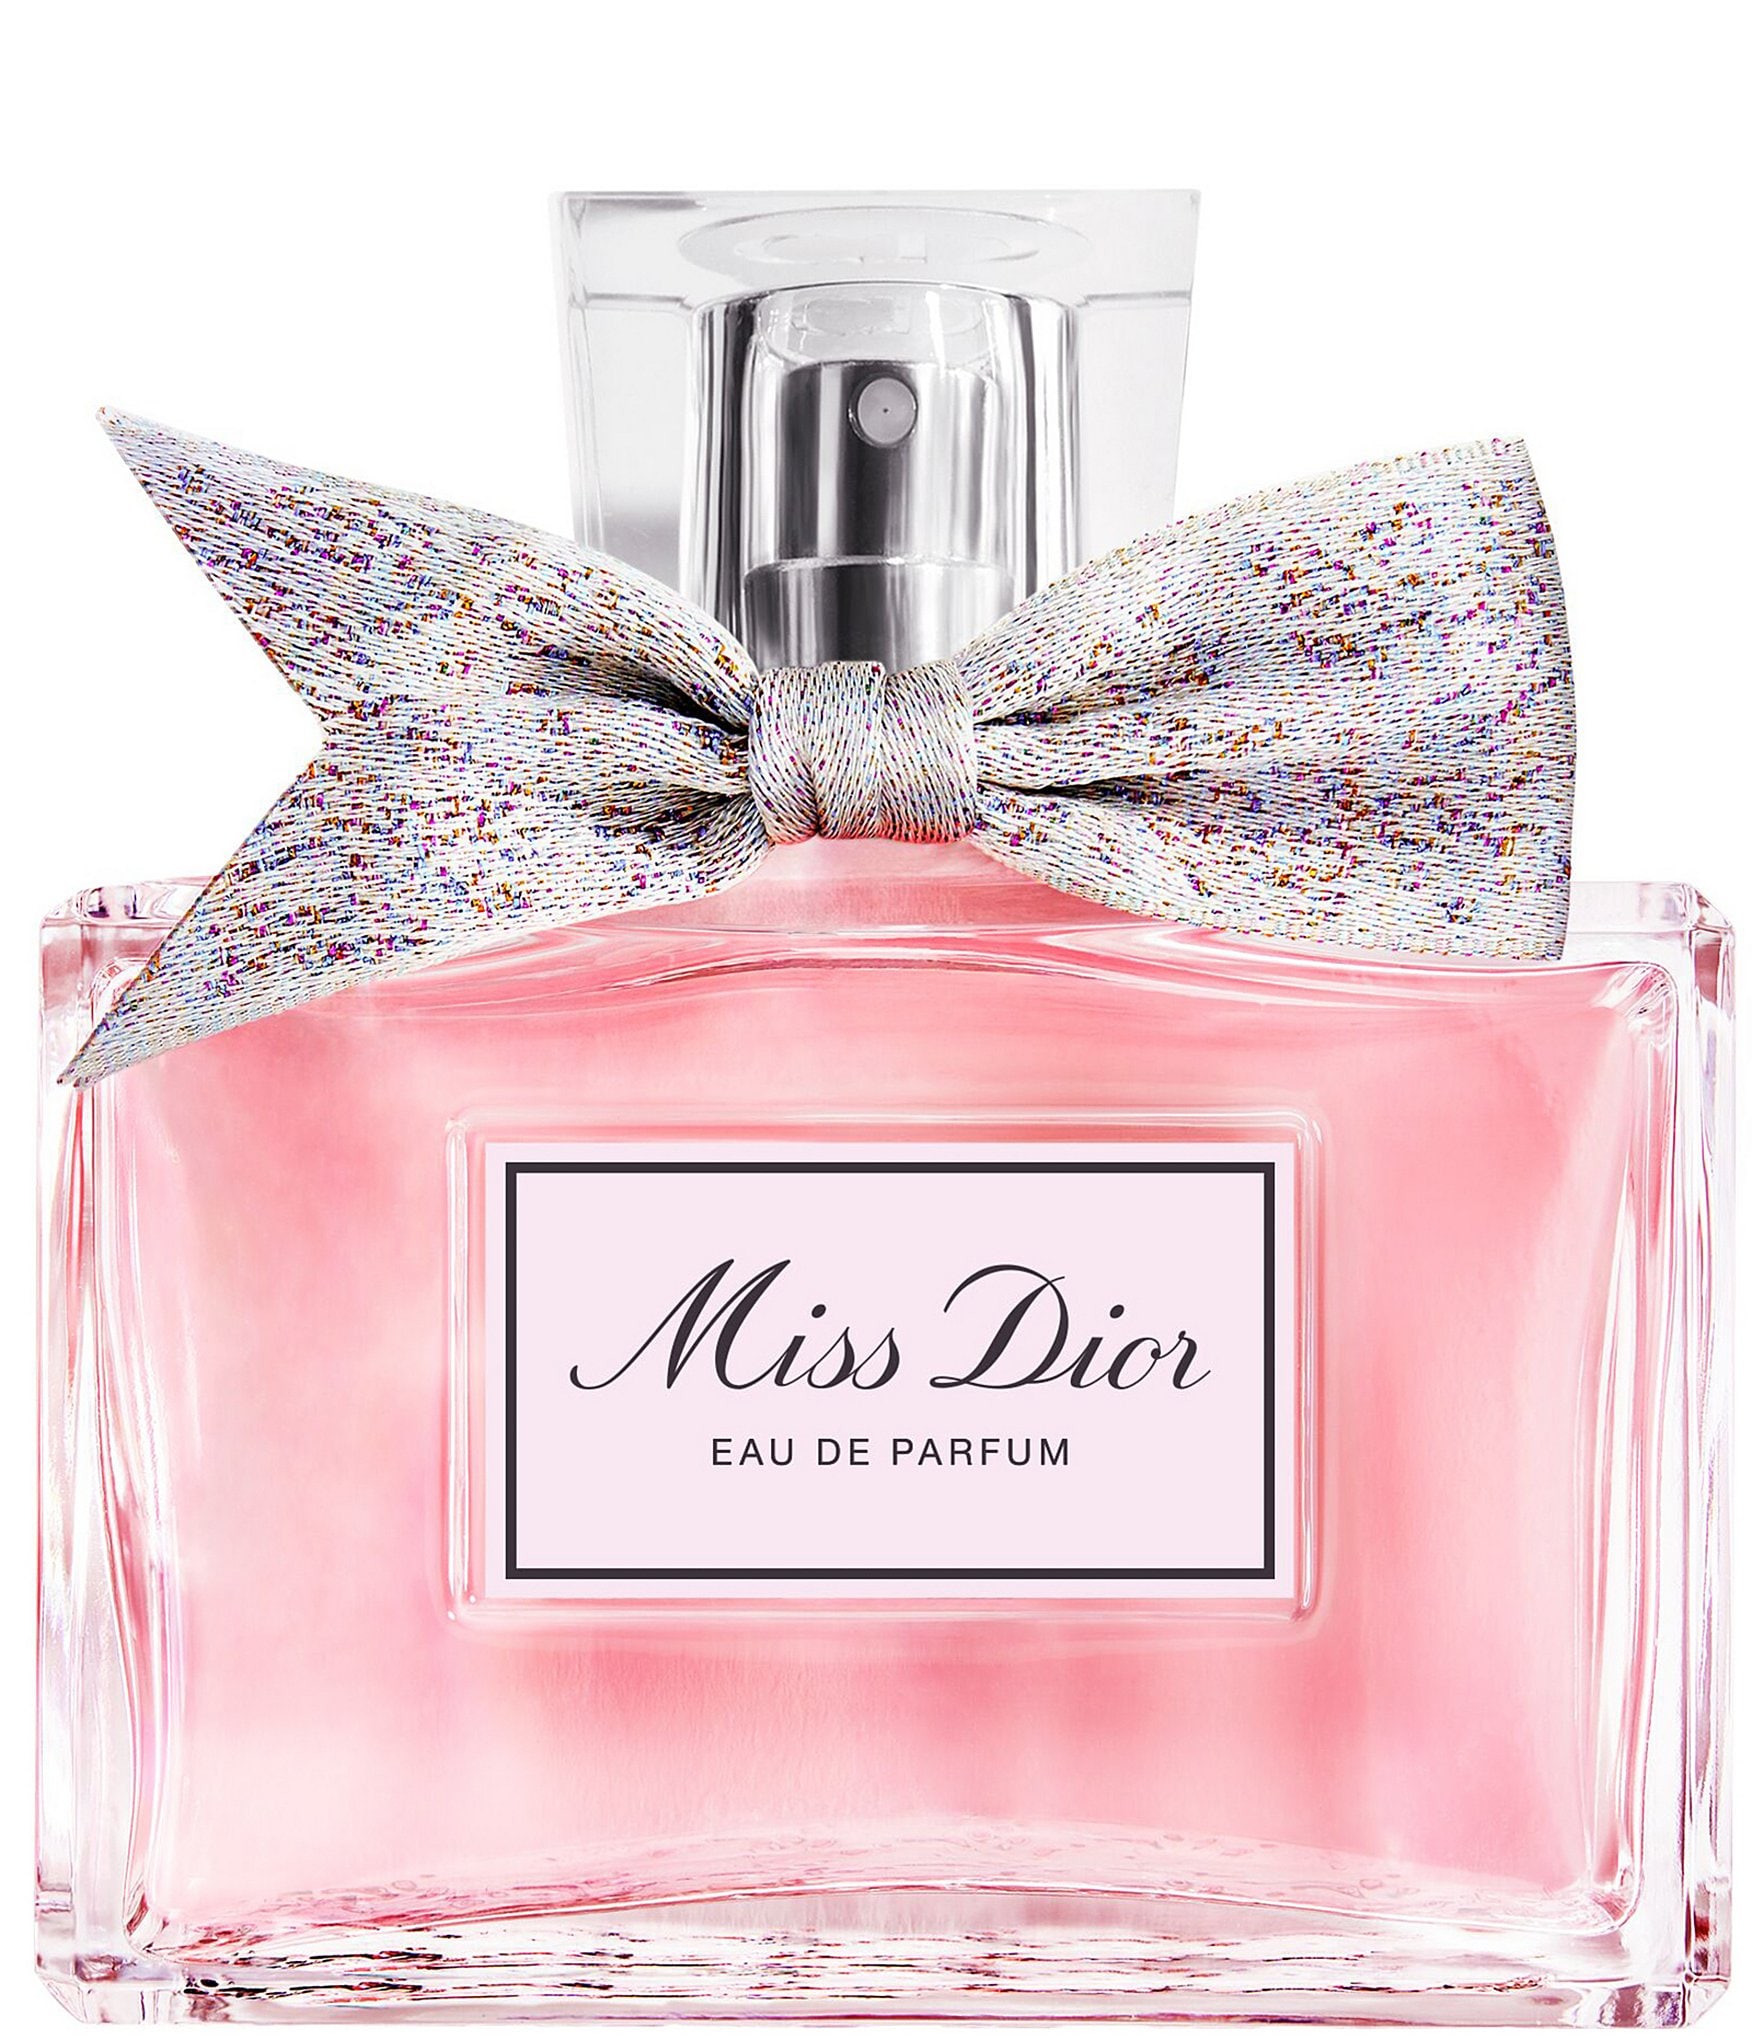 Dior: Christian Dior Opened Its First Parfums Boutique In